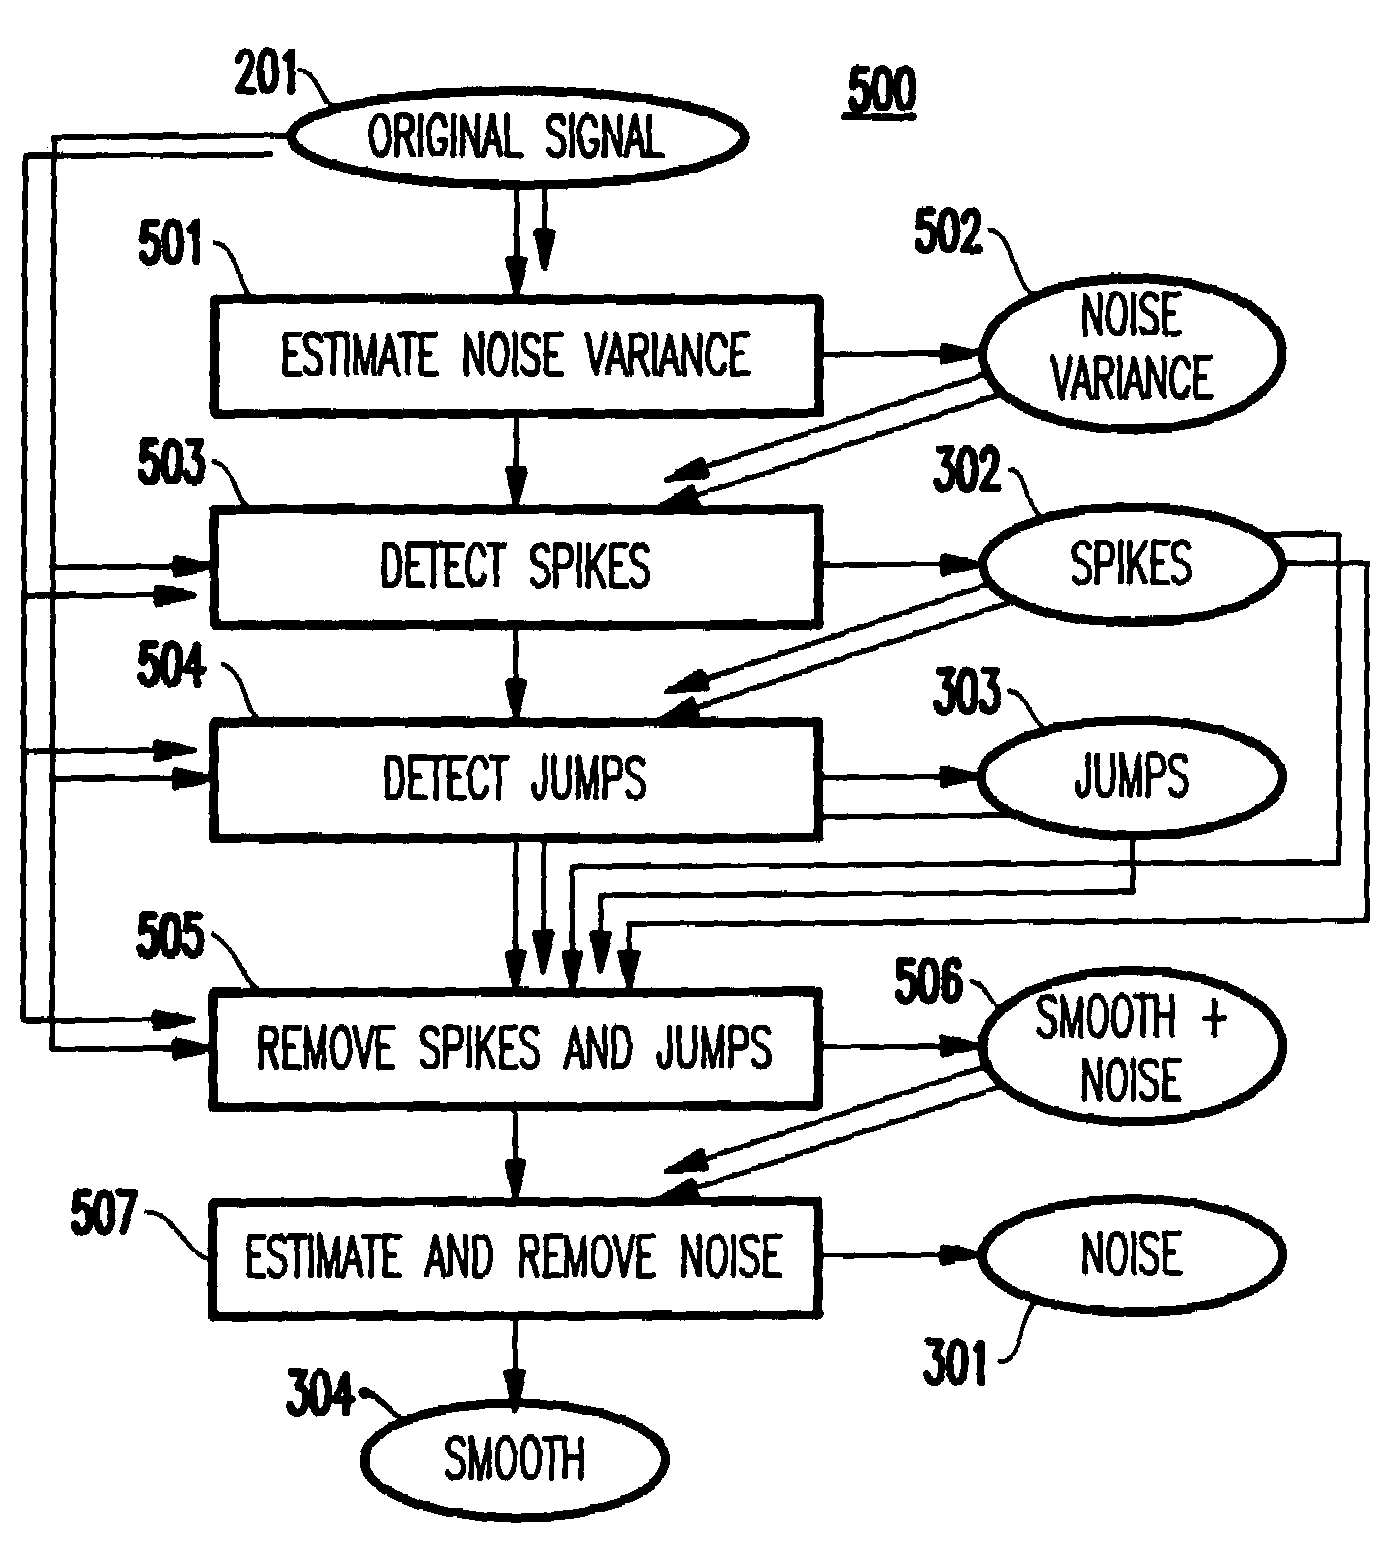 Method and apparatus for preprocessing technique for forecasting in capacity management, software rejuvenation and dynamic resource allocation applications